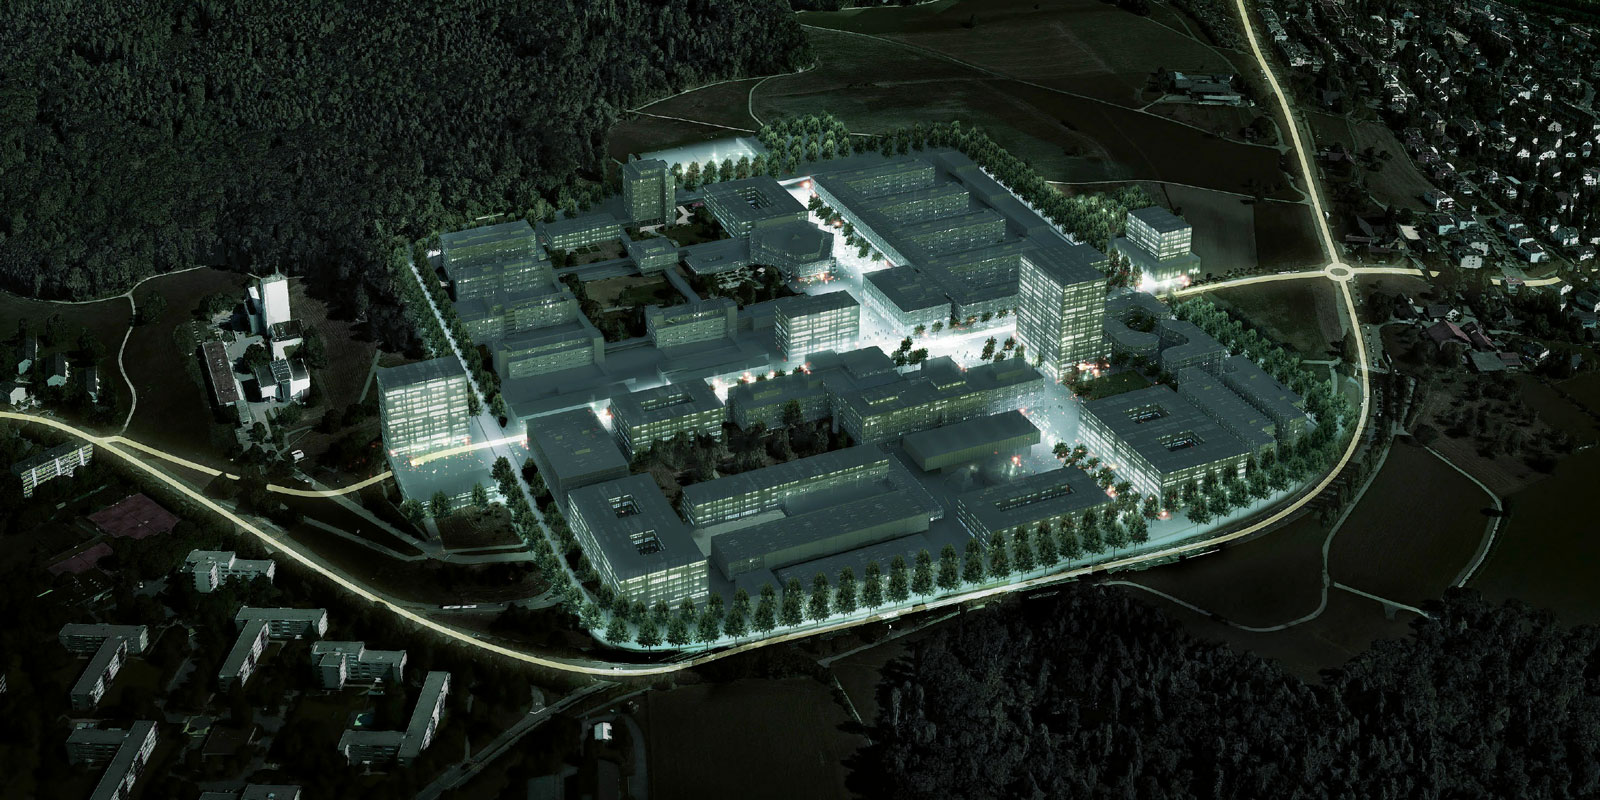 Enlarged view: The Hönggerberg campus is central to ETH Zurich's future plans: The vision is to make it an attractive campus with the feel of a city district. (Visualisation: EM2N)